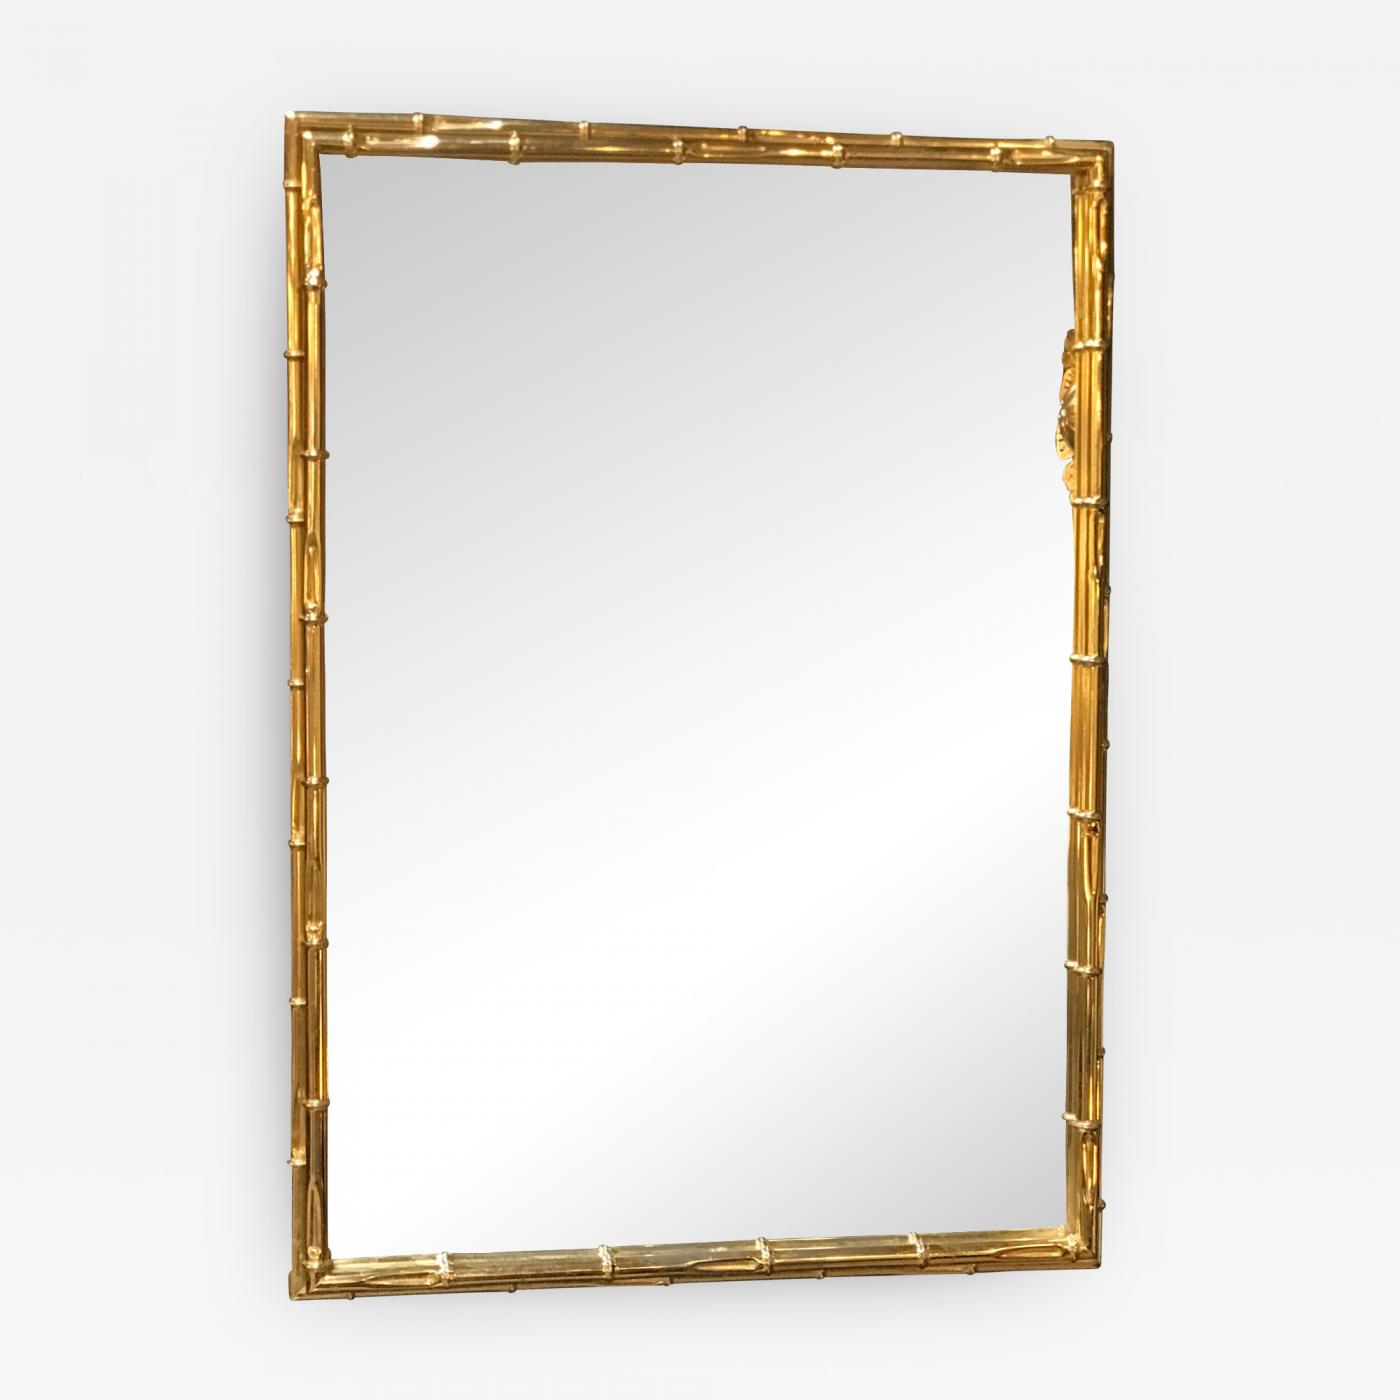 https://cdn.incollect.com/sites/default/files/zoom/Large-Rectangular-Faux-Bamboo-Brass-Wall-Mirror-Italy-1960s-338588-1213775.jpg